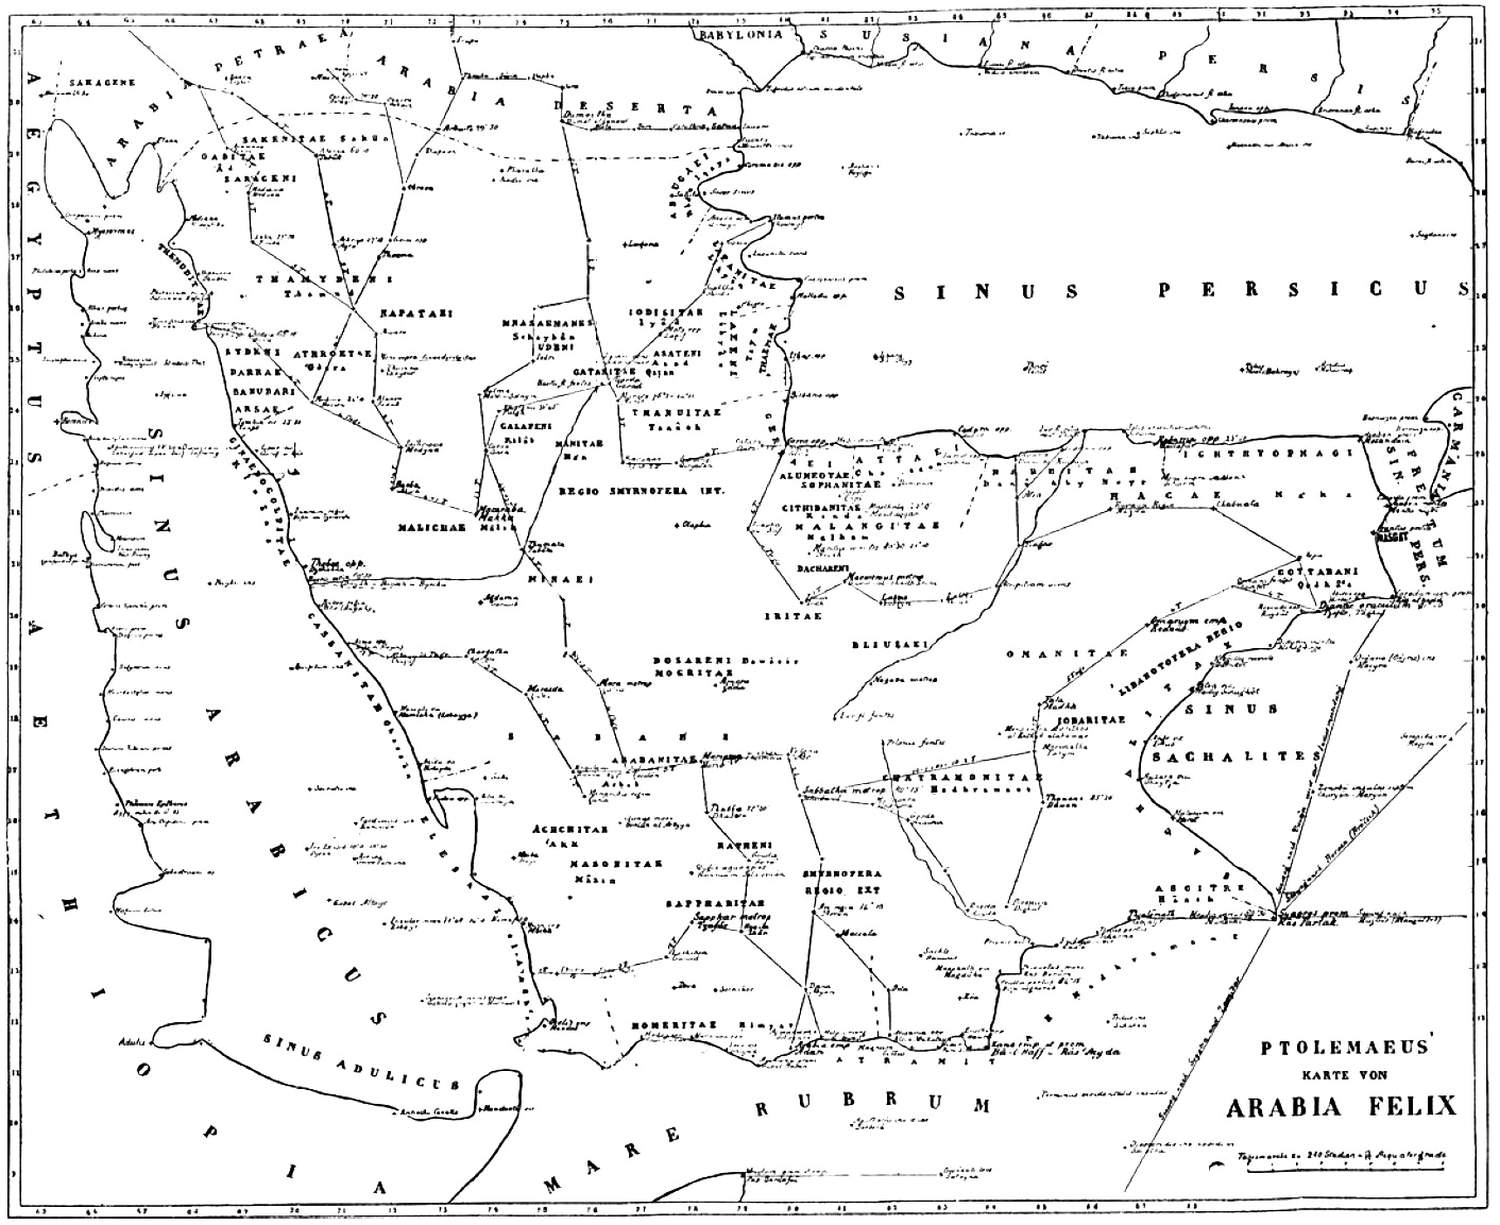 Arabia: the Cradle of Islam, by Rev. S. M. Zwemer—A Project Gutenberg eBook